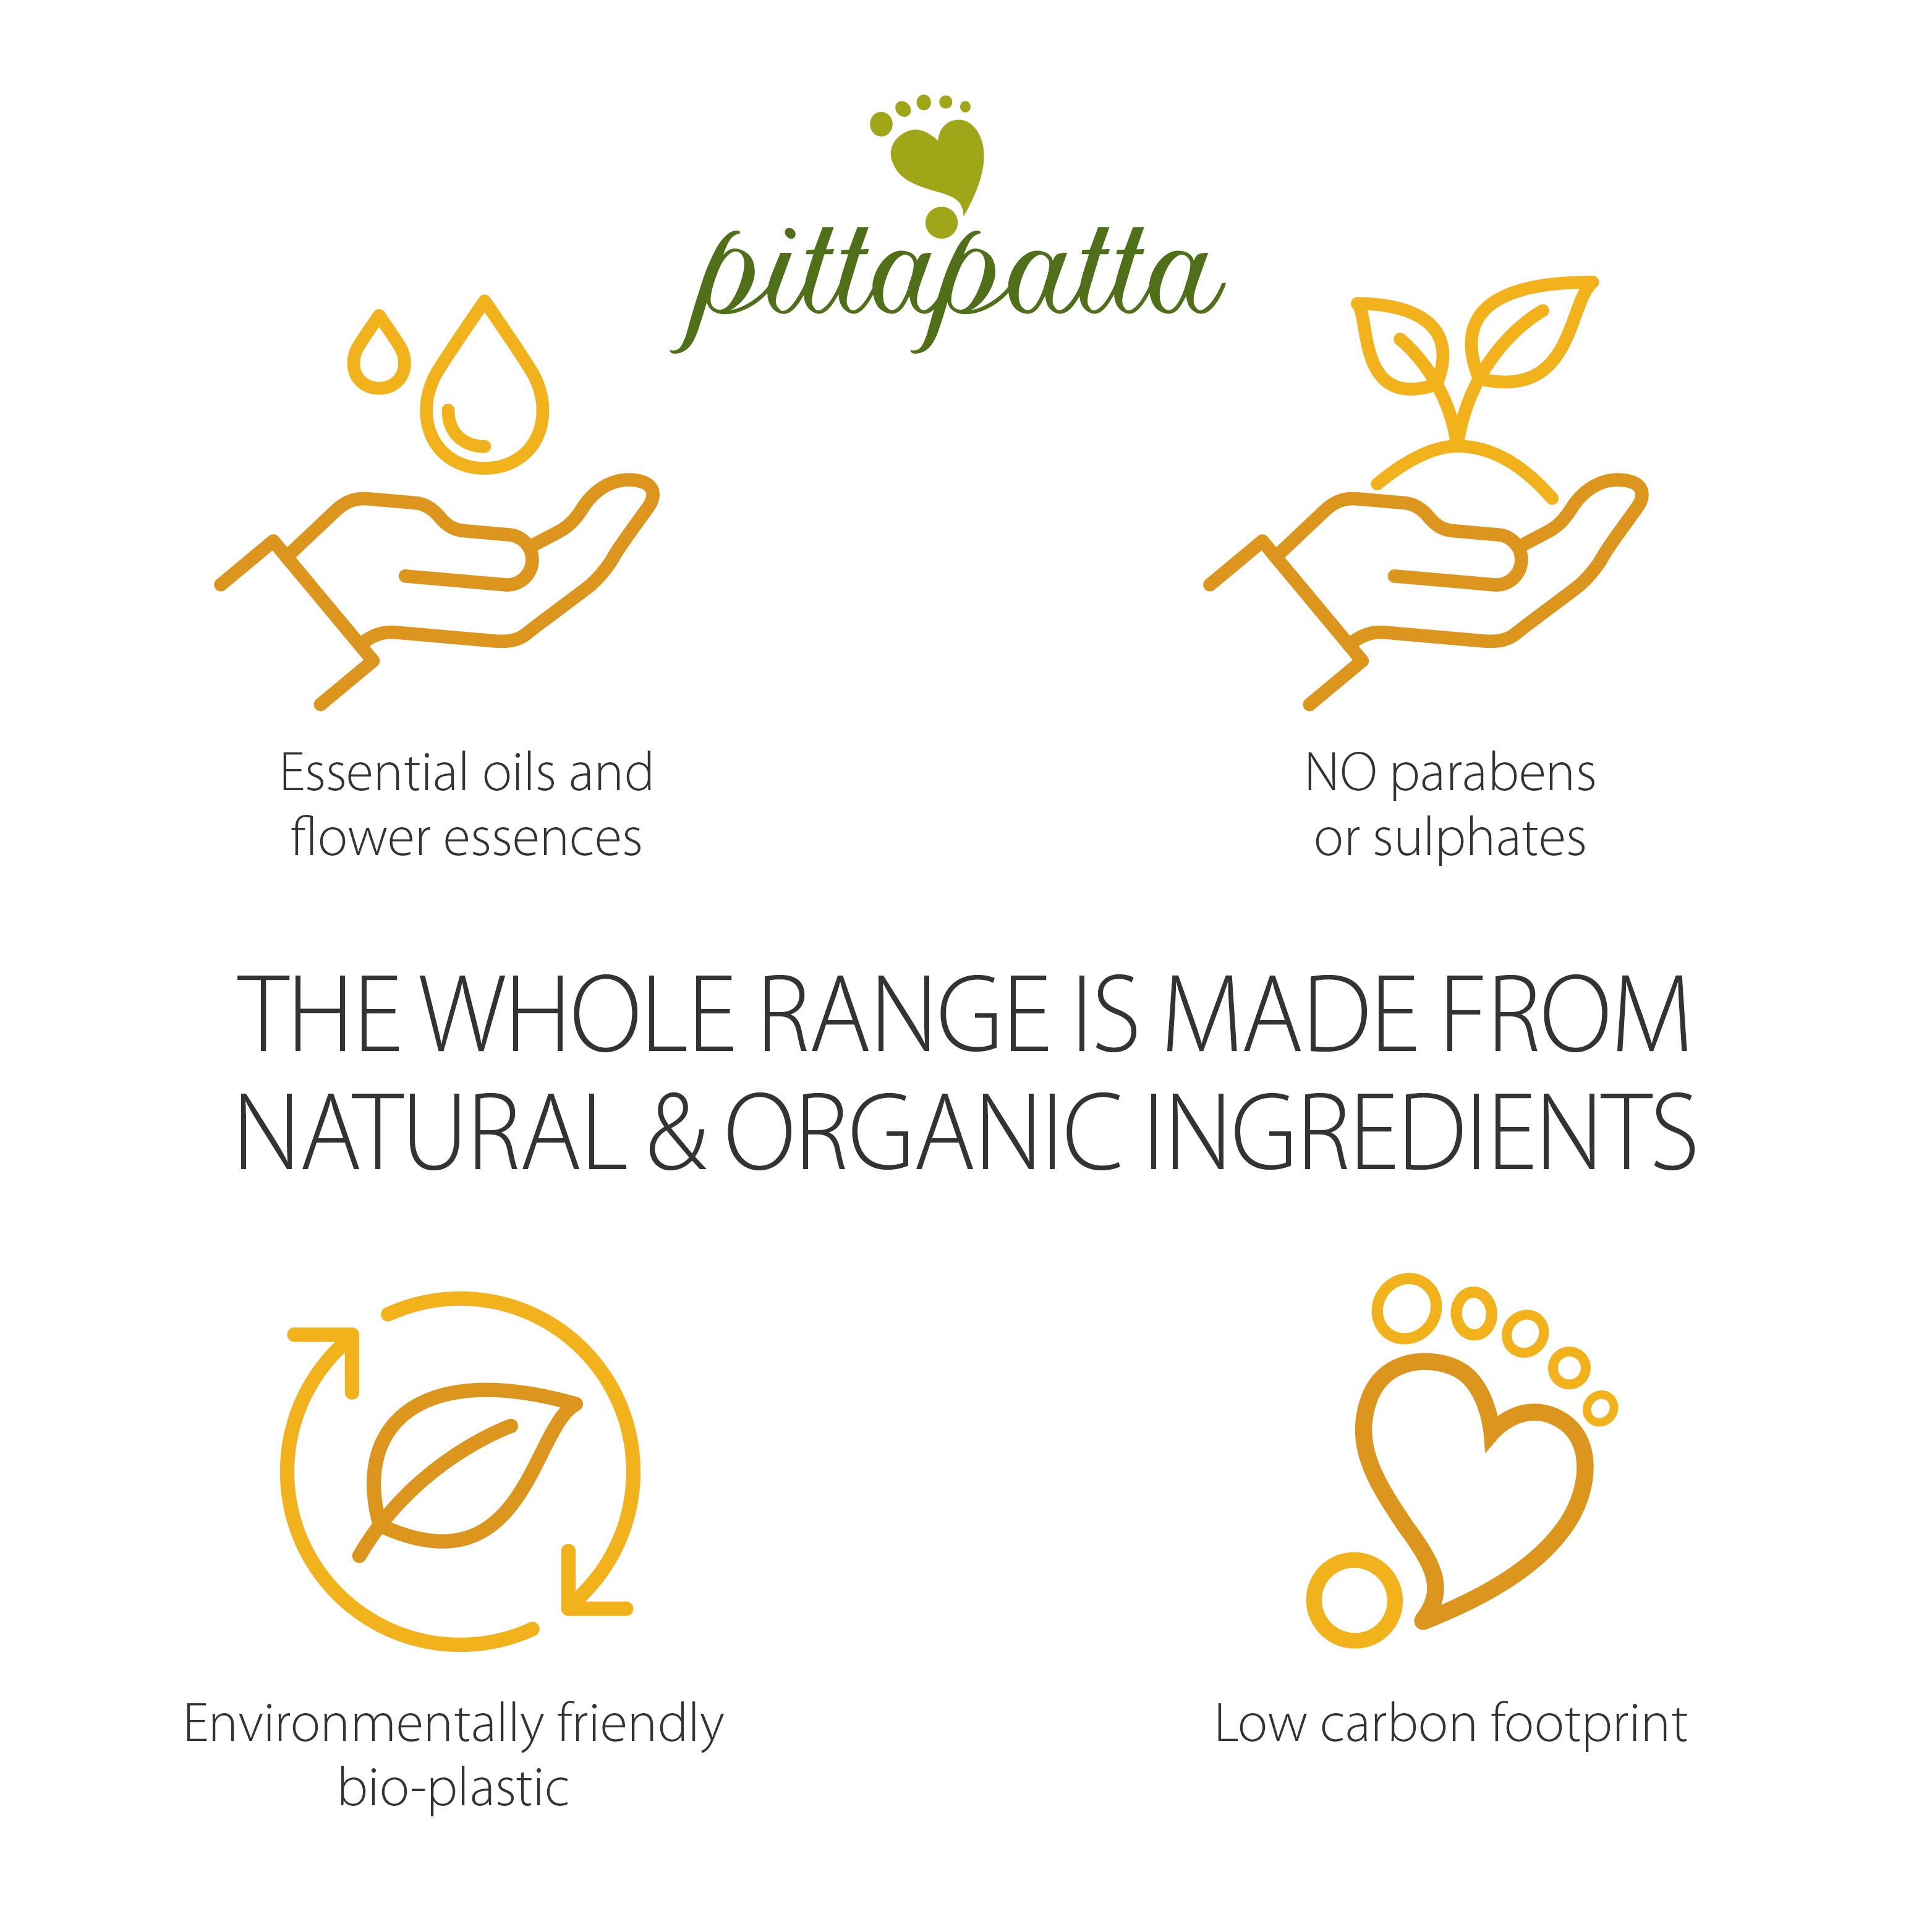 Pittapatta Shampoo & Bodywash is made from natural and organic ingredients and infused with organic essential oils and flower essences designed to be gentle and a joy to use.